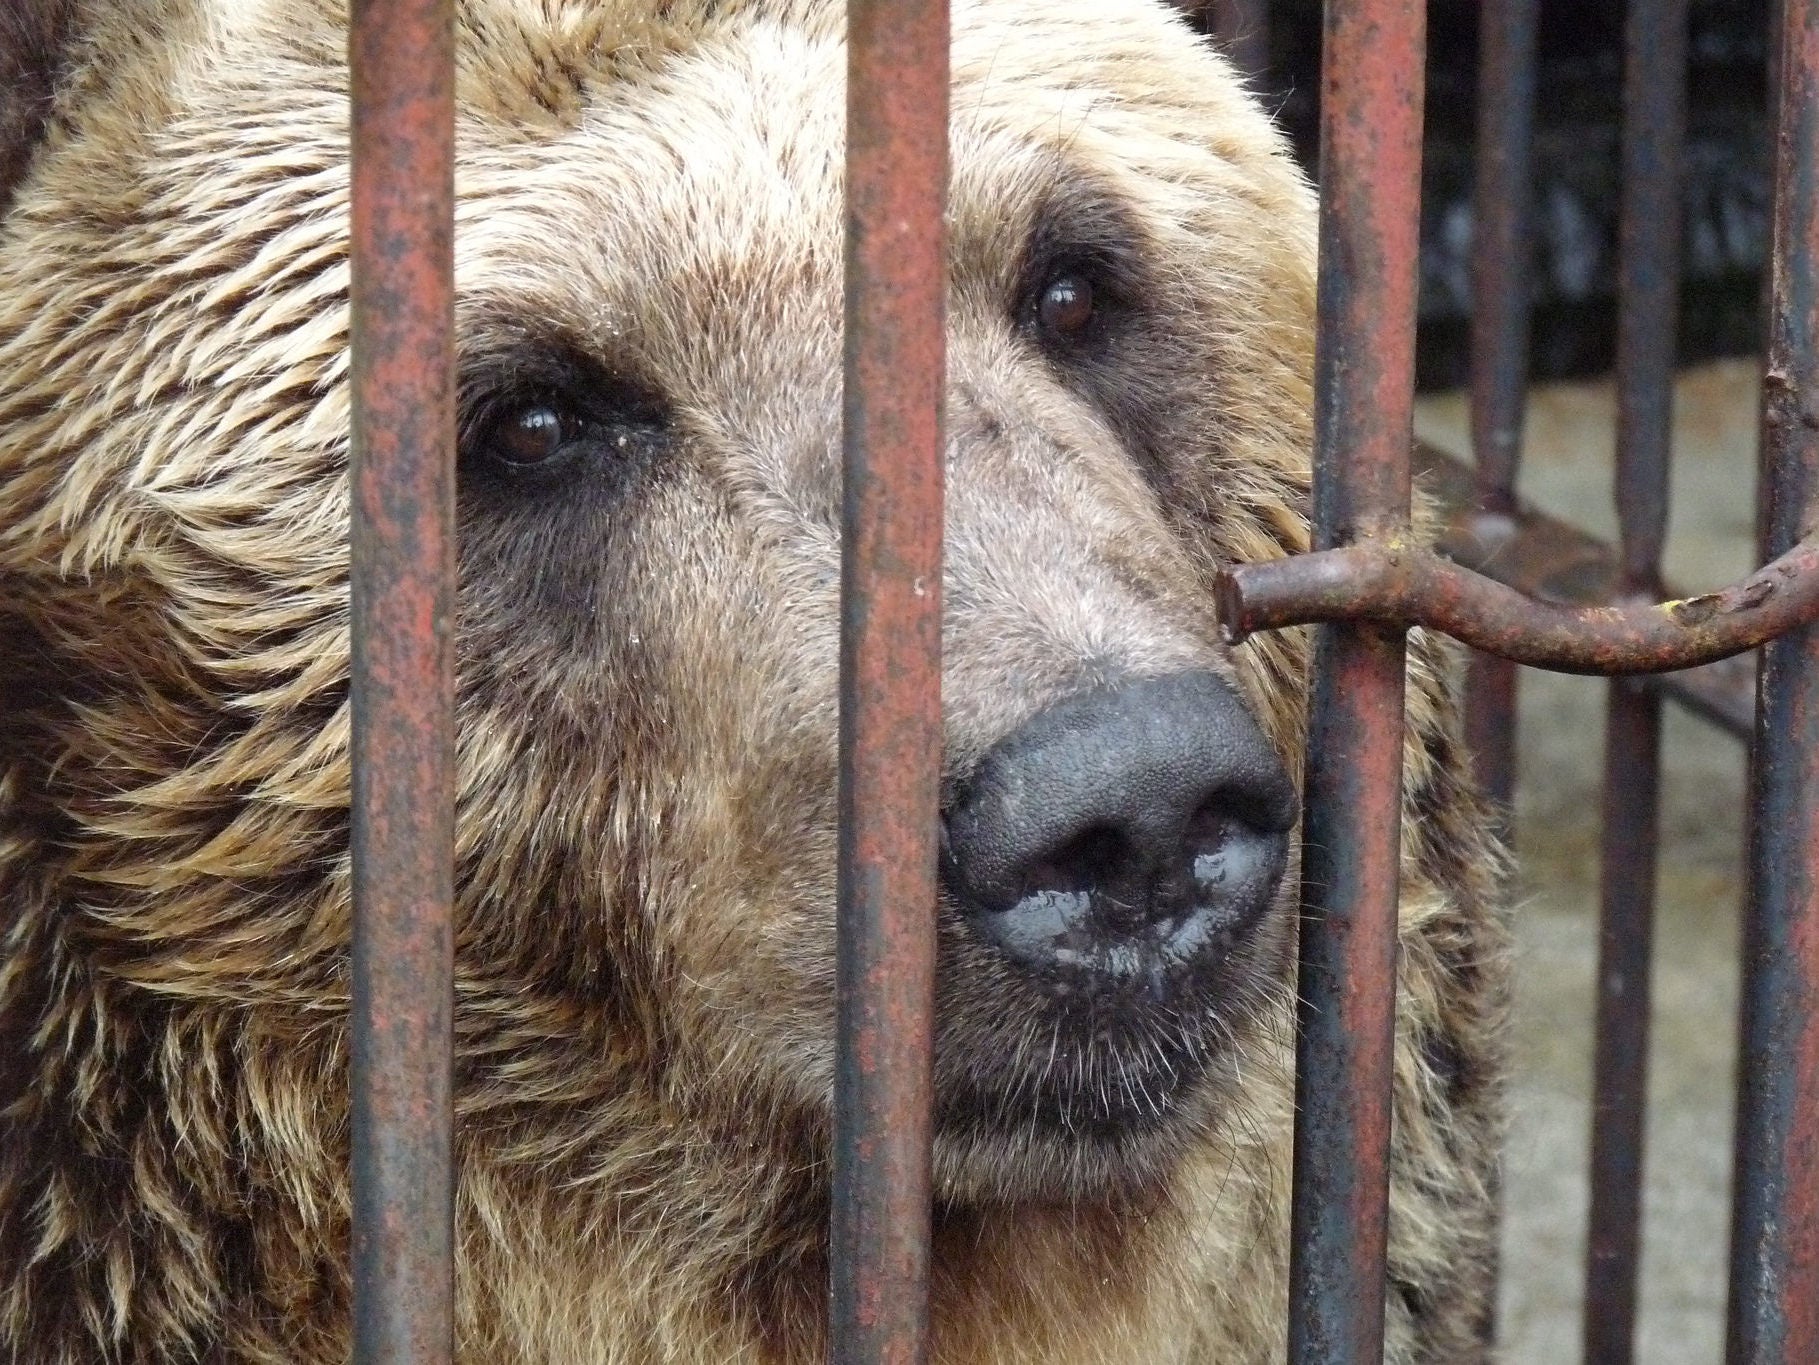 The bears will be moved from behind bars to a specially created home in Yorkshire